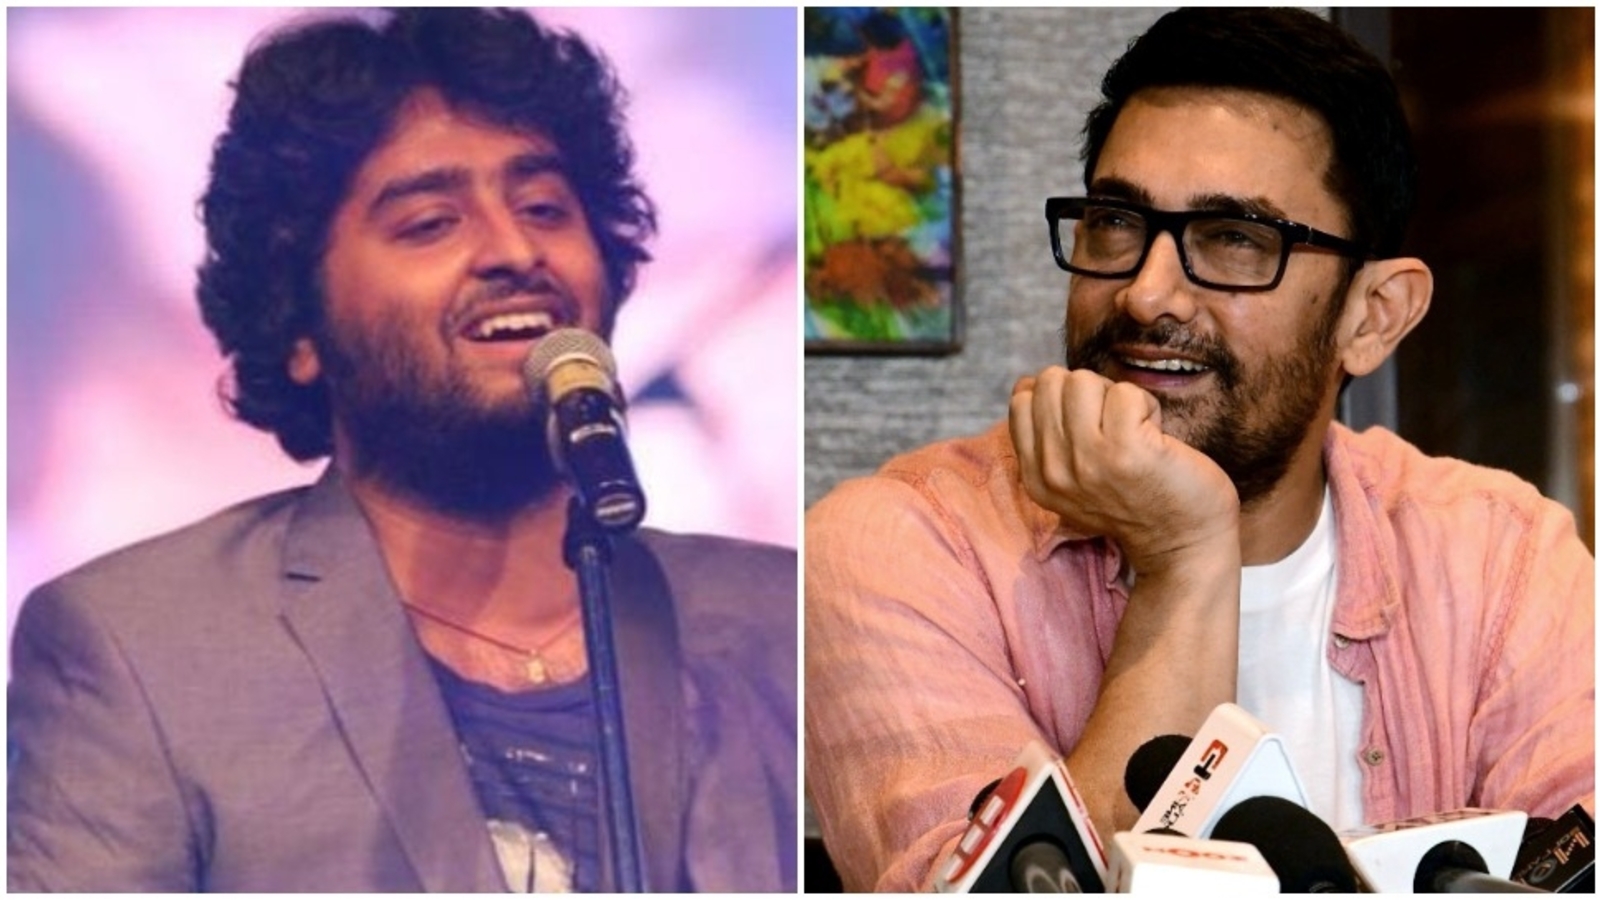 When Arijit Singh fanboy Aamir Khan said he sits right in front of stage for his concerts, ‘sab kuch chhor ke’